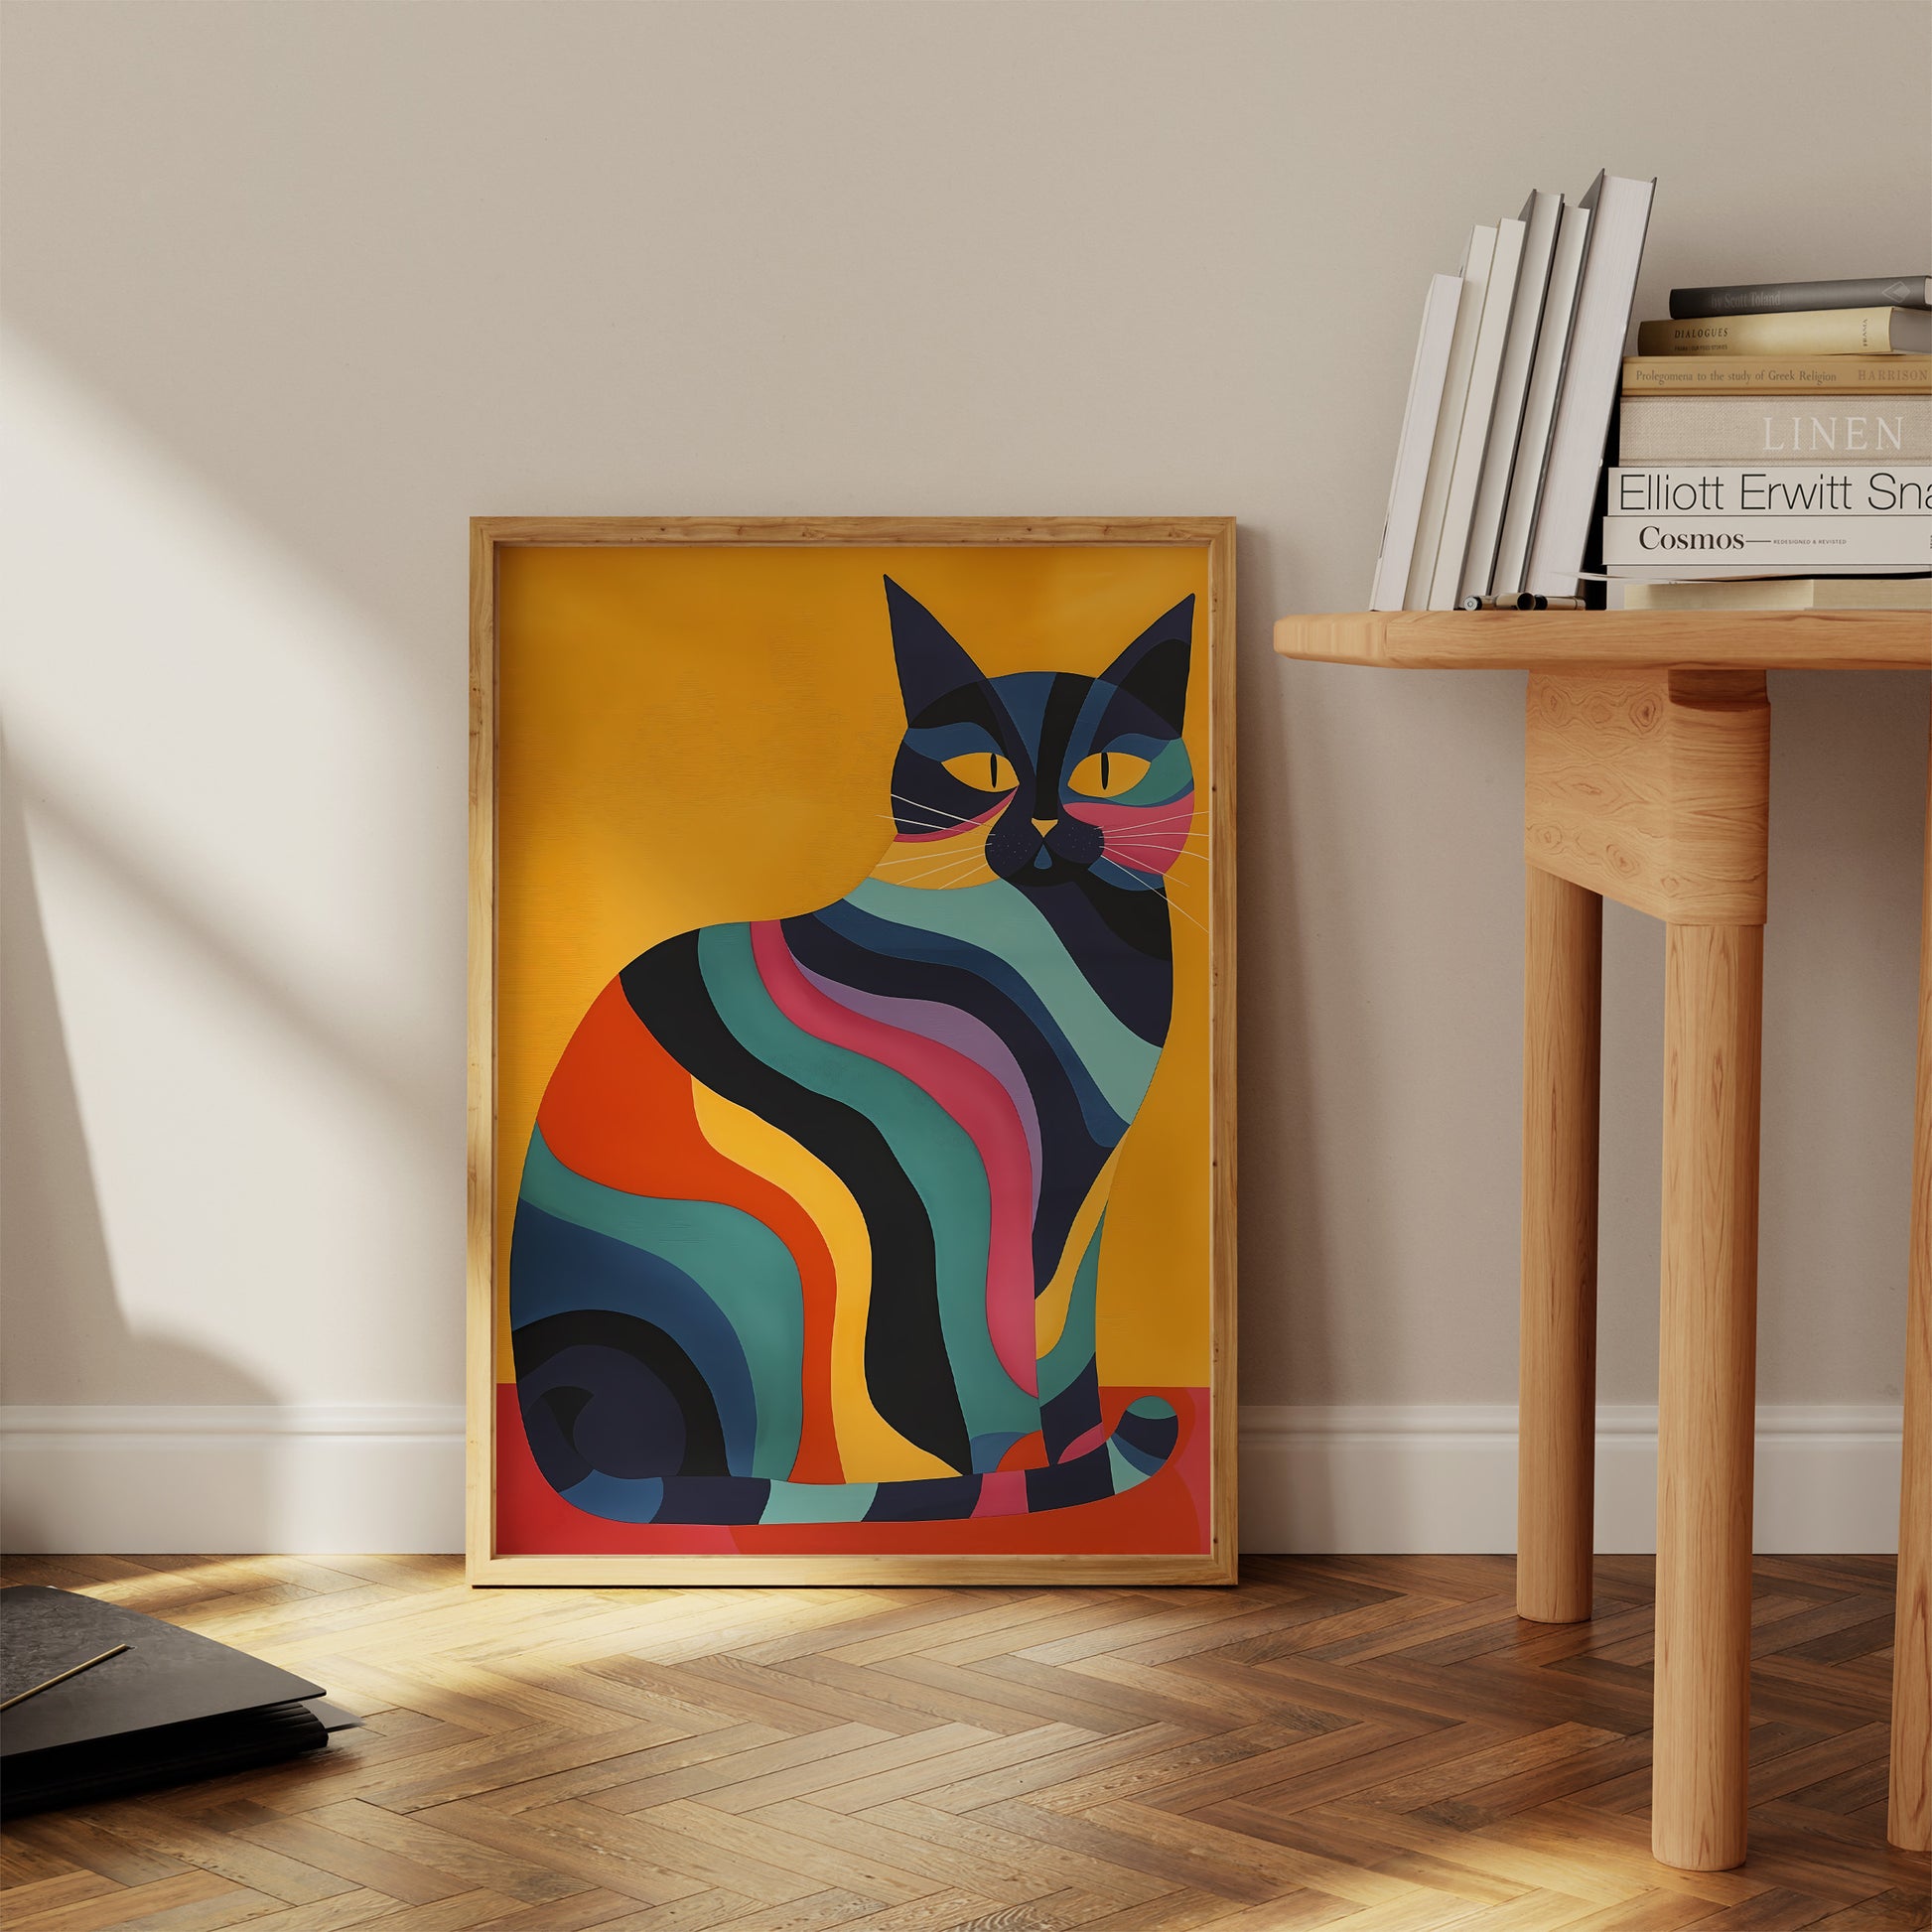 Colorful abstract cat painting leaning against a wall in a room with books and furniture.